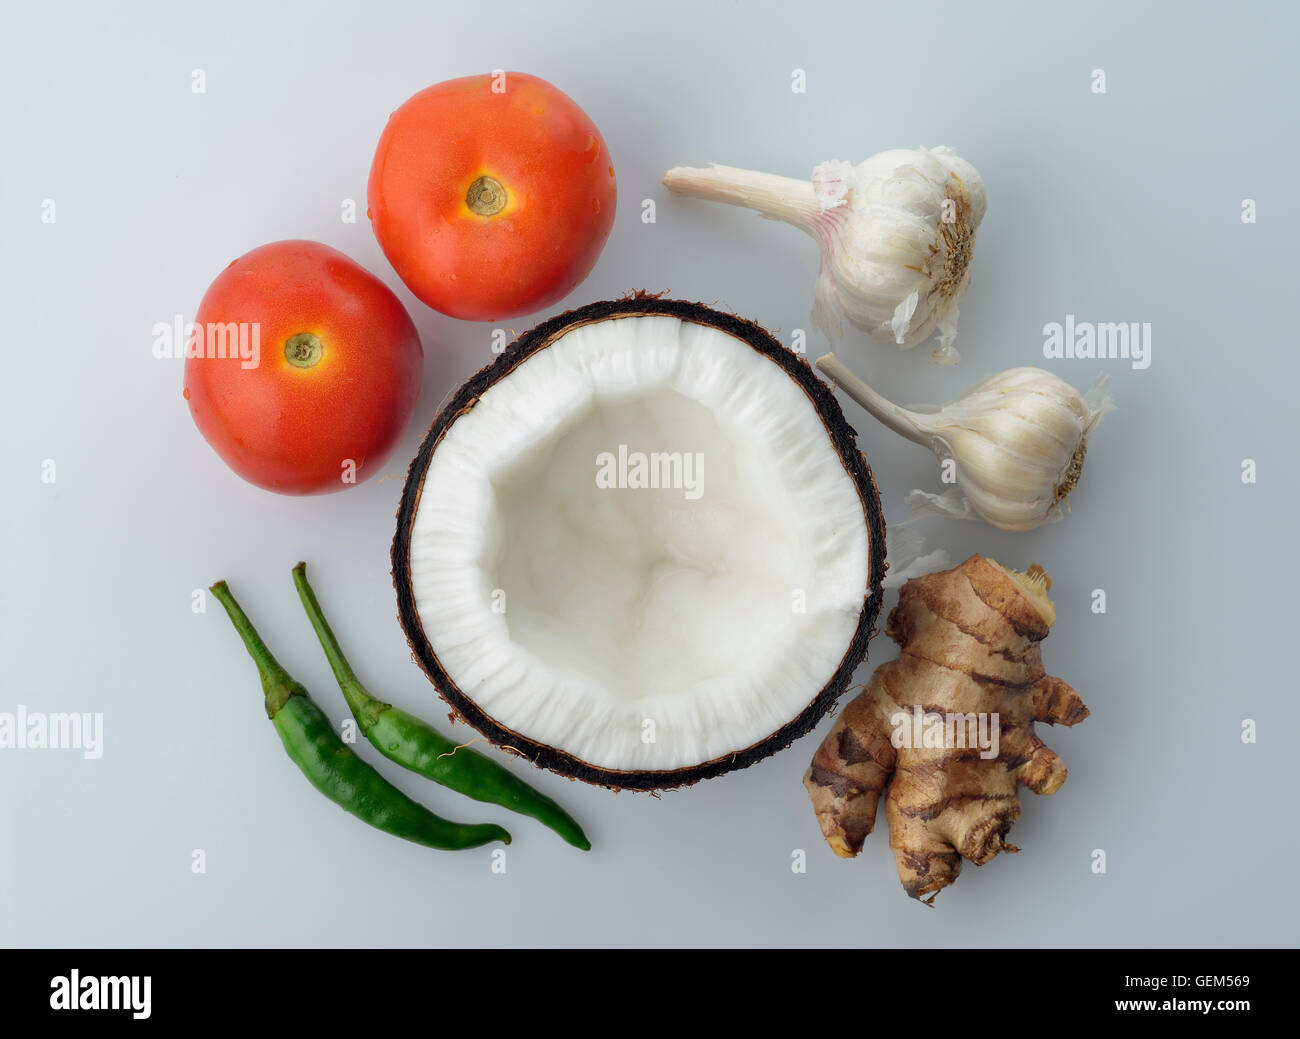 Top View of Coconut,Ginger ,Tomatoes,Garlic and Green Chili on White Background Stock Photo